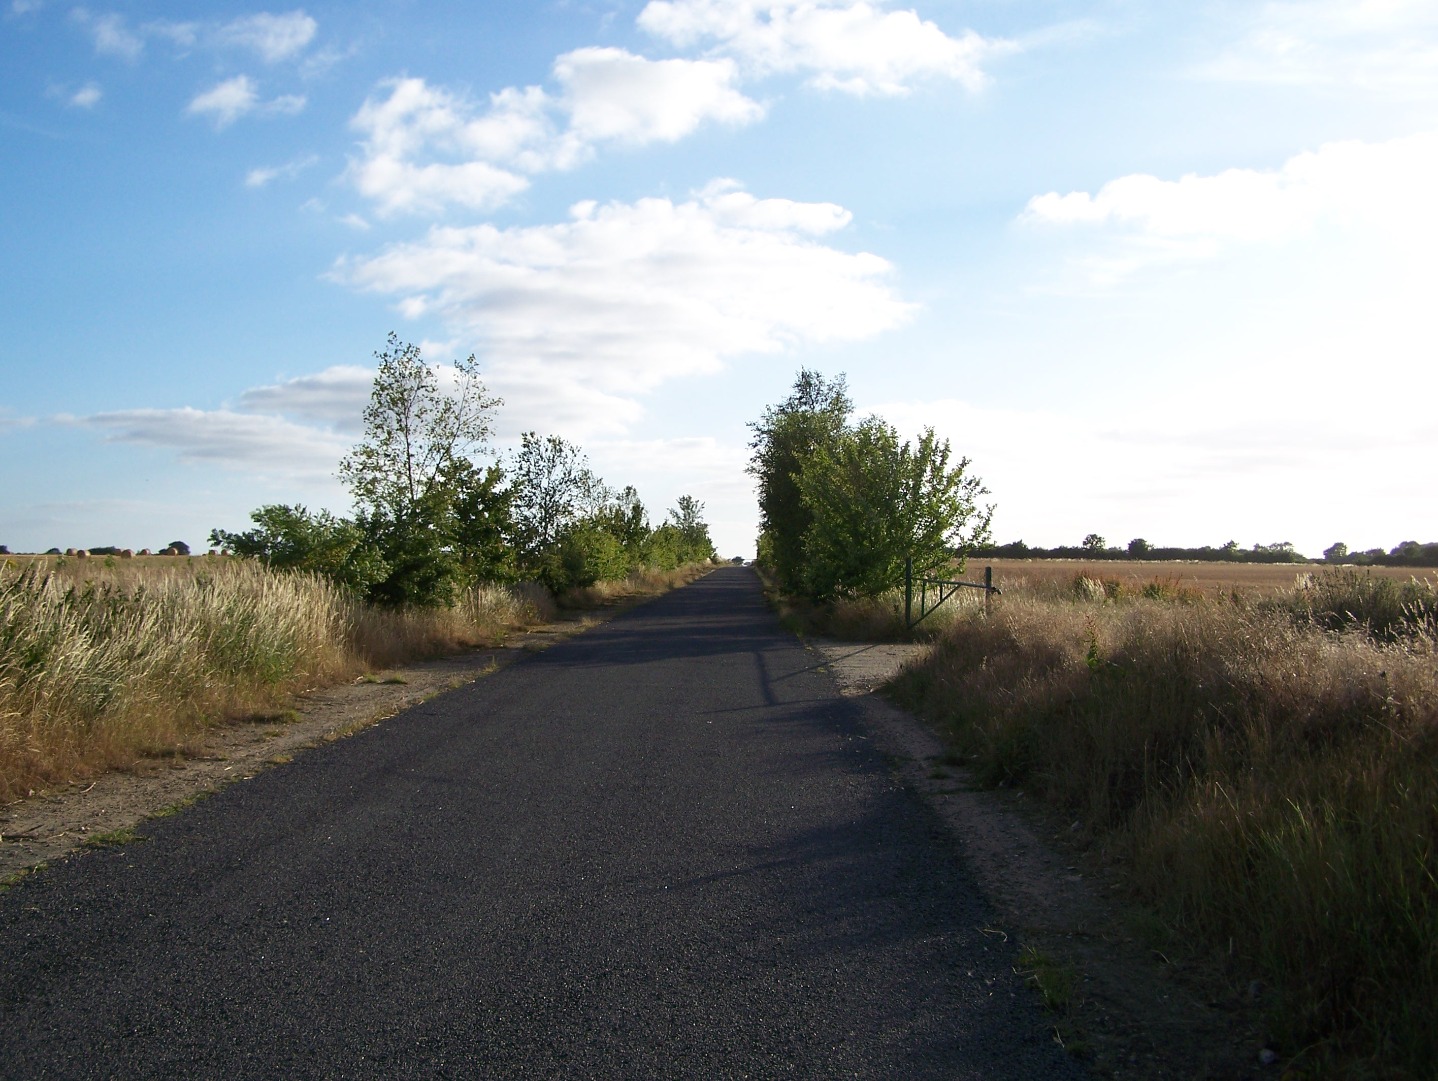 002Middle section of 08:26 runway, currently a minor road, looking north-east 14:07:2006.JPG